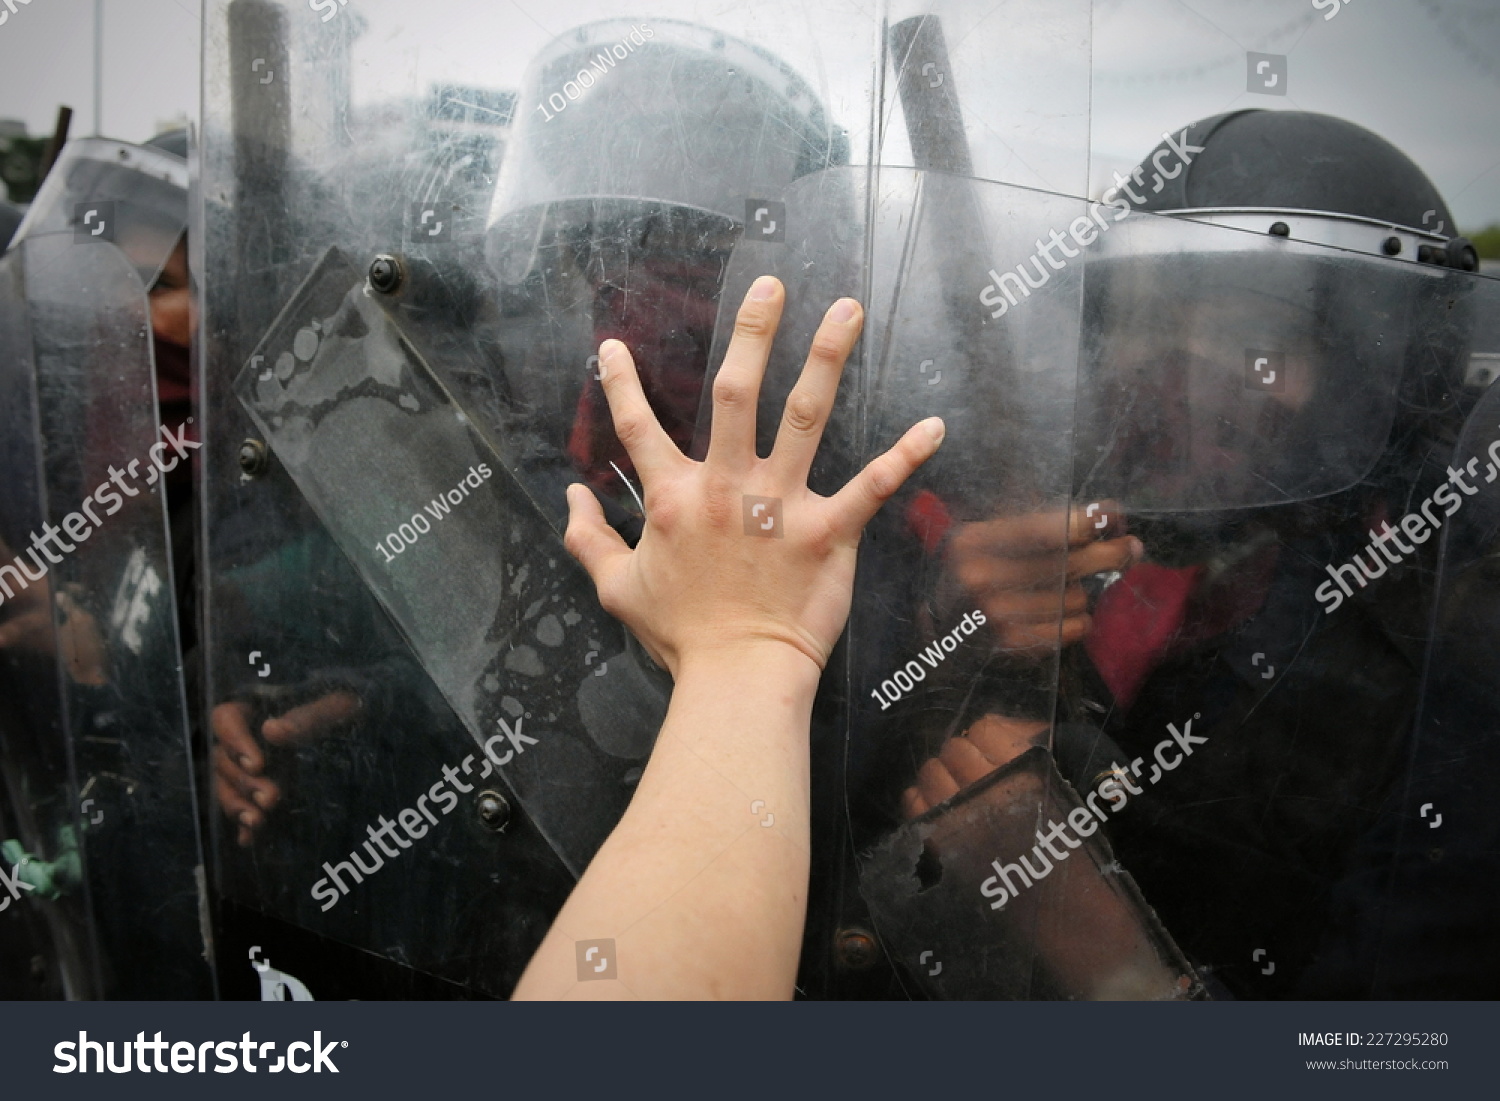 Protester Pushes Police Riot Shields at a Political Rally #227295280